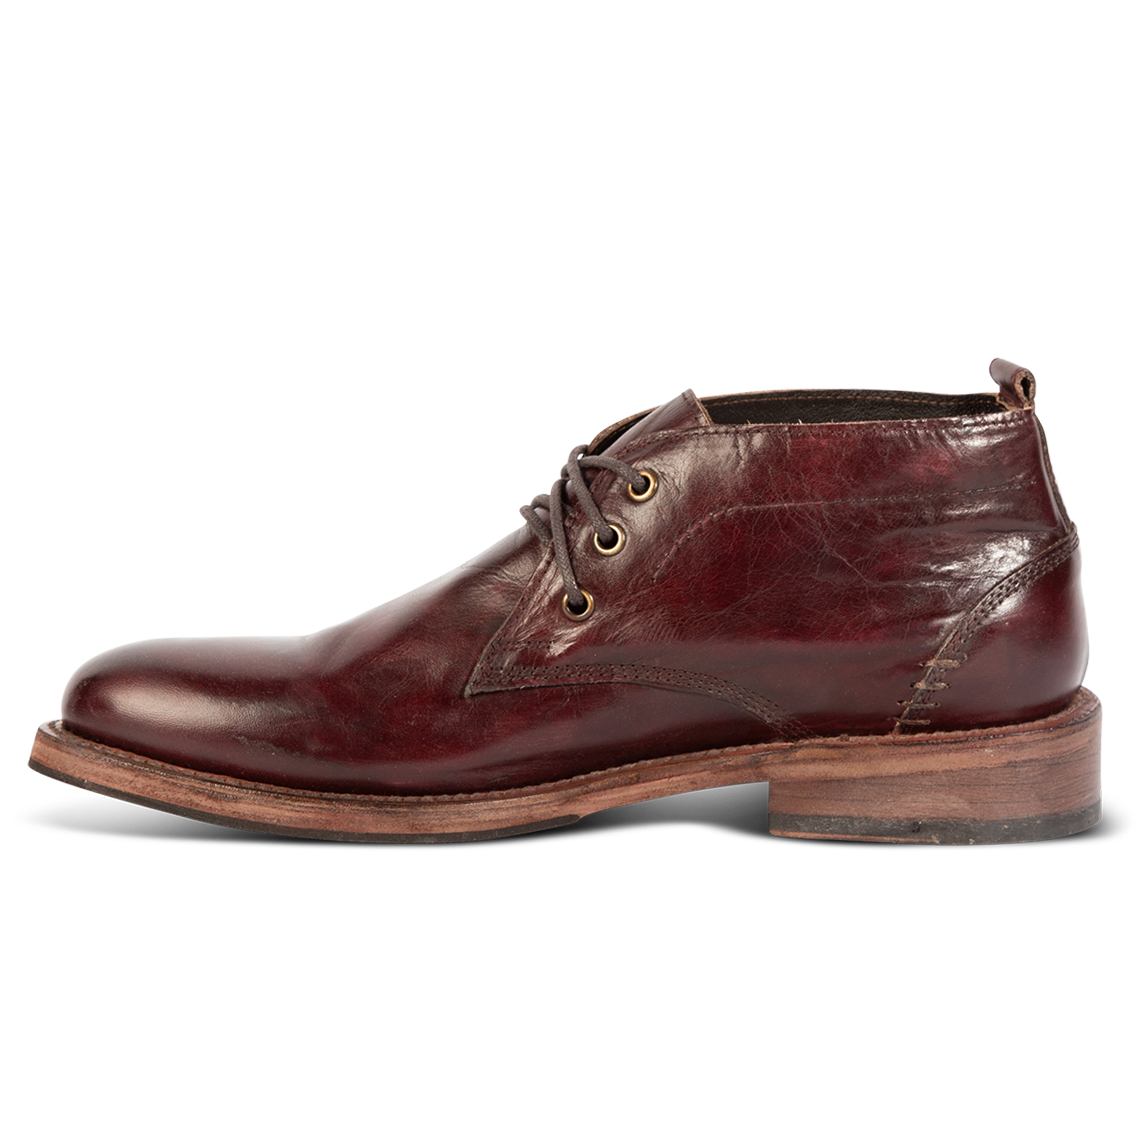 Inside view showing stitch detailing and brass lace hardware on FREEBIRD men's McCoy wine shoe